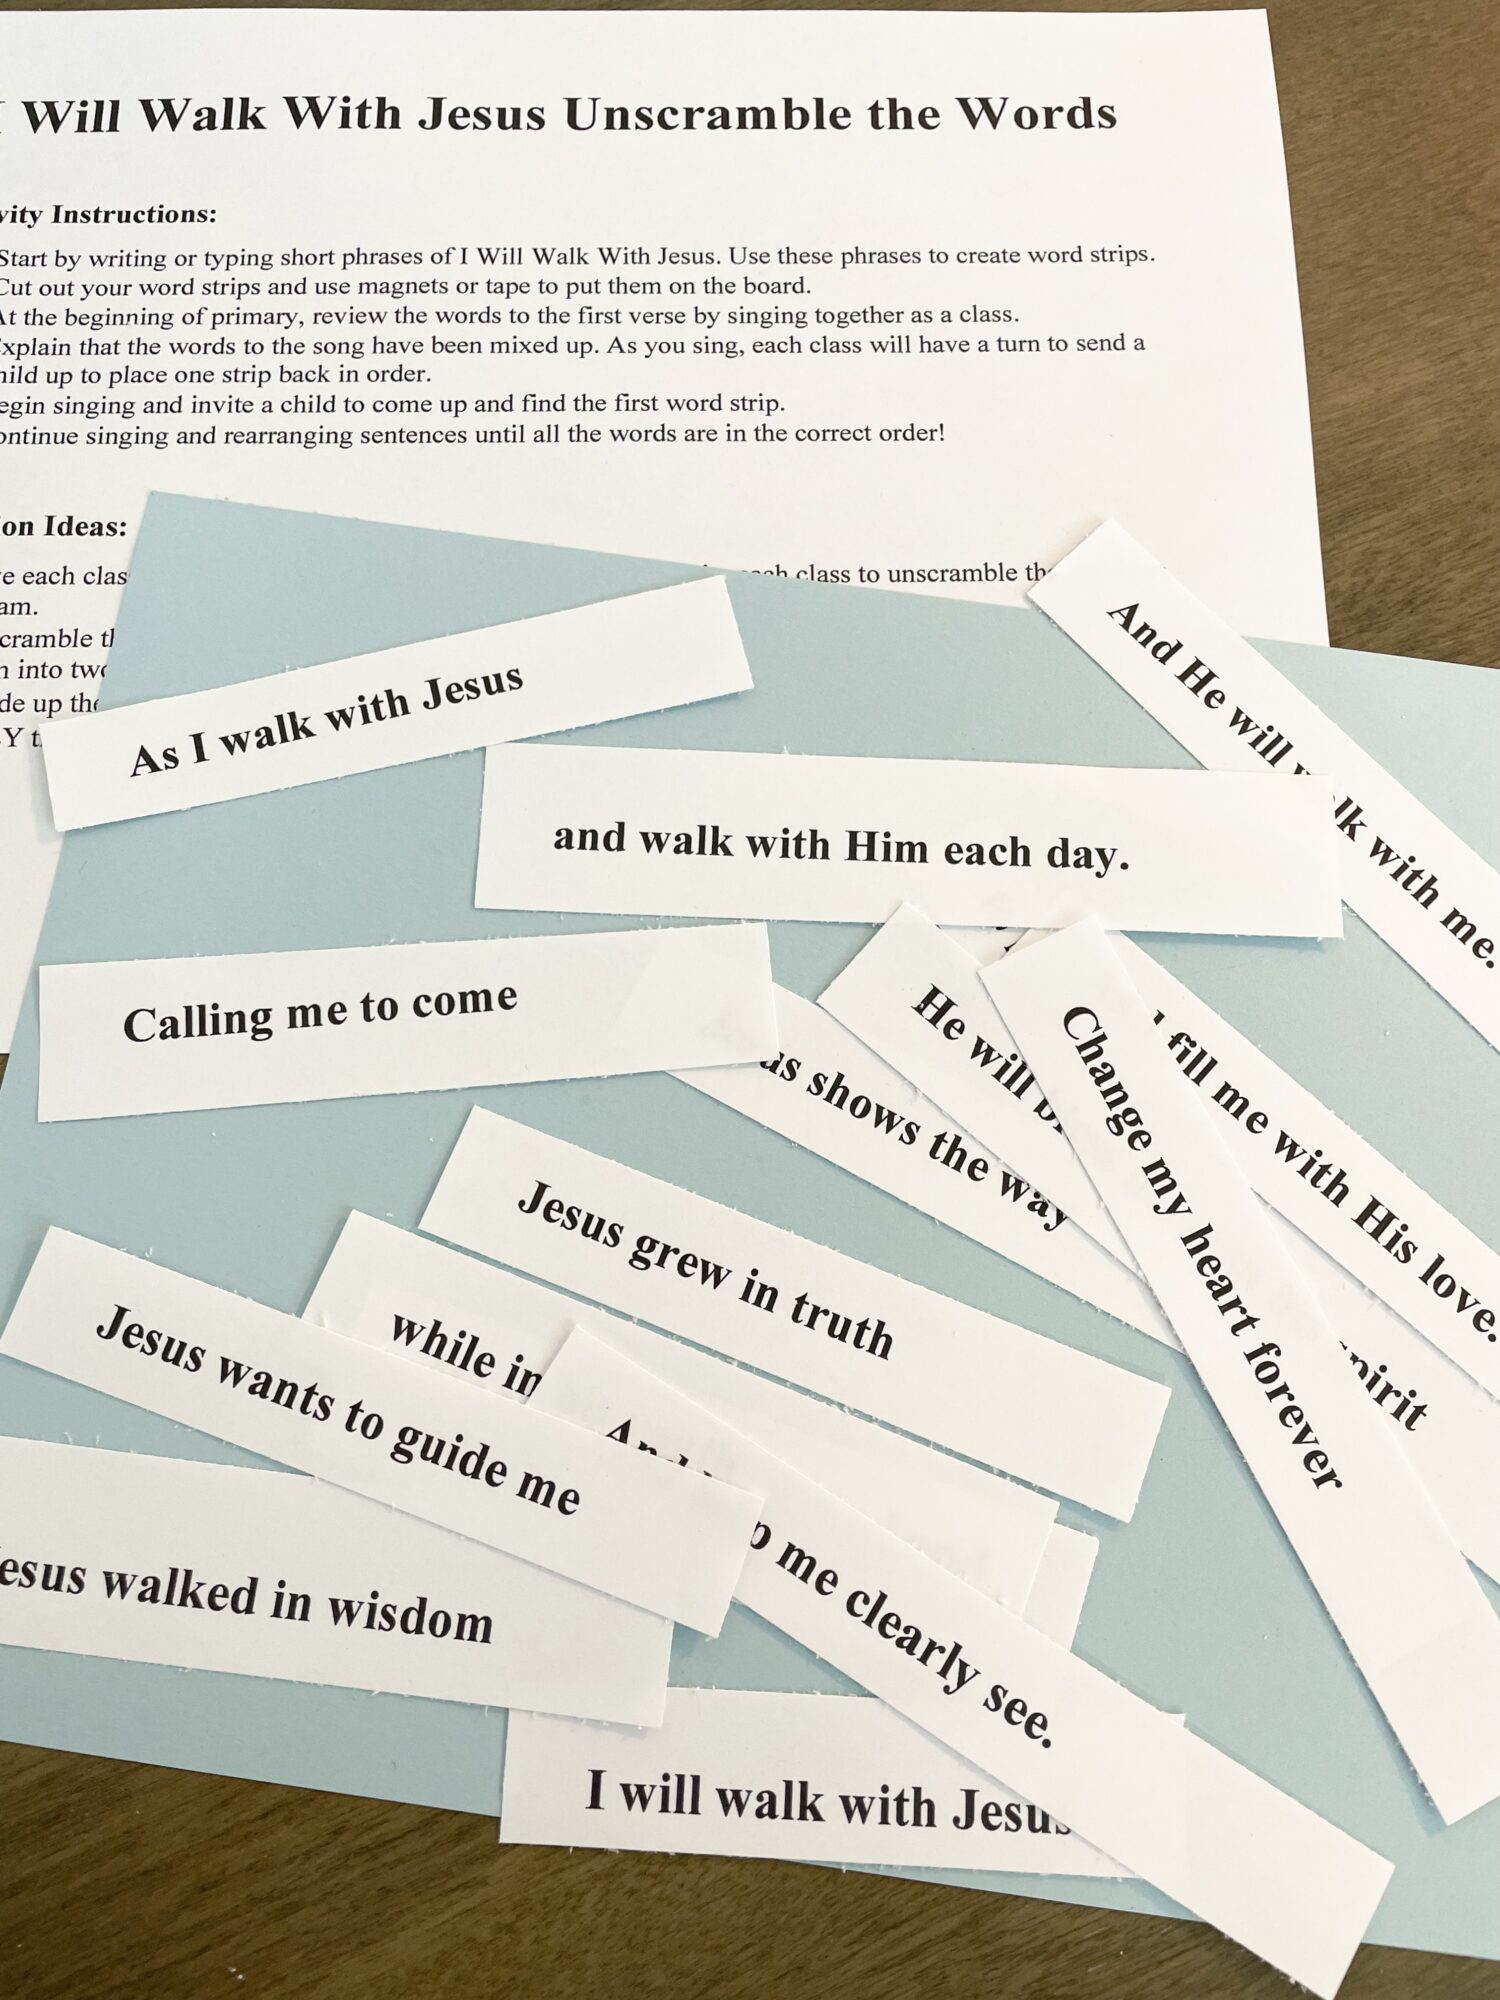 I Will Walk with Jesus Unscramble the Words singing time ideas for LDS Primary music leaders